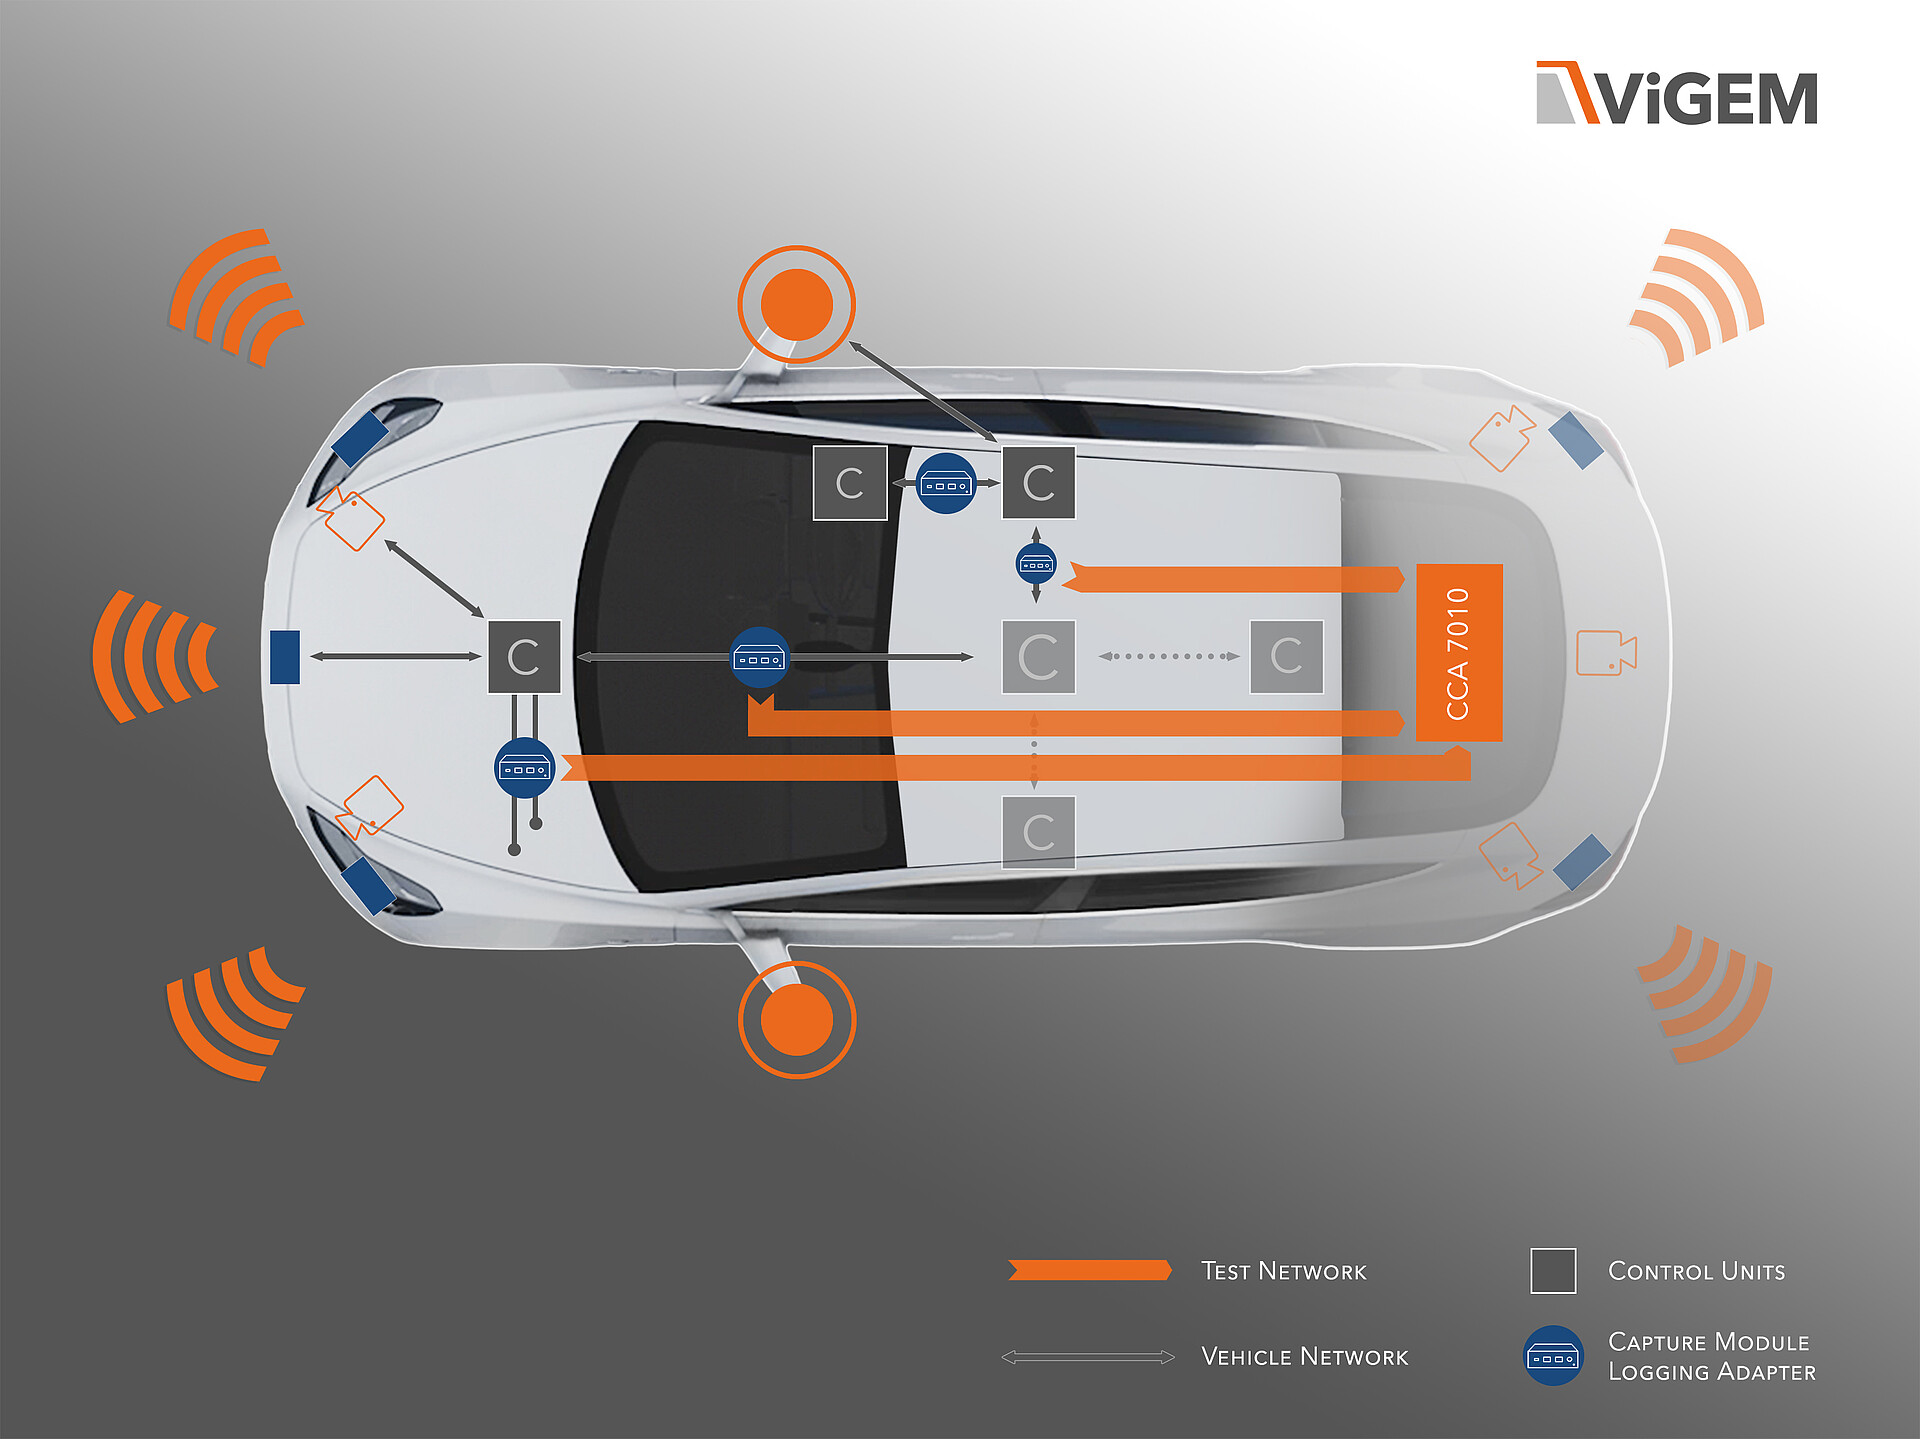 ViGEM infografic about distributed data logging in vehicles: Data logger CCA 7010 and Capture Moduls